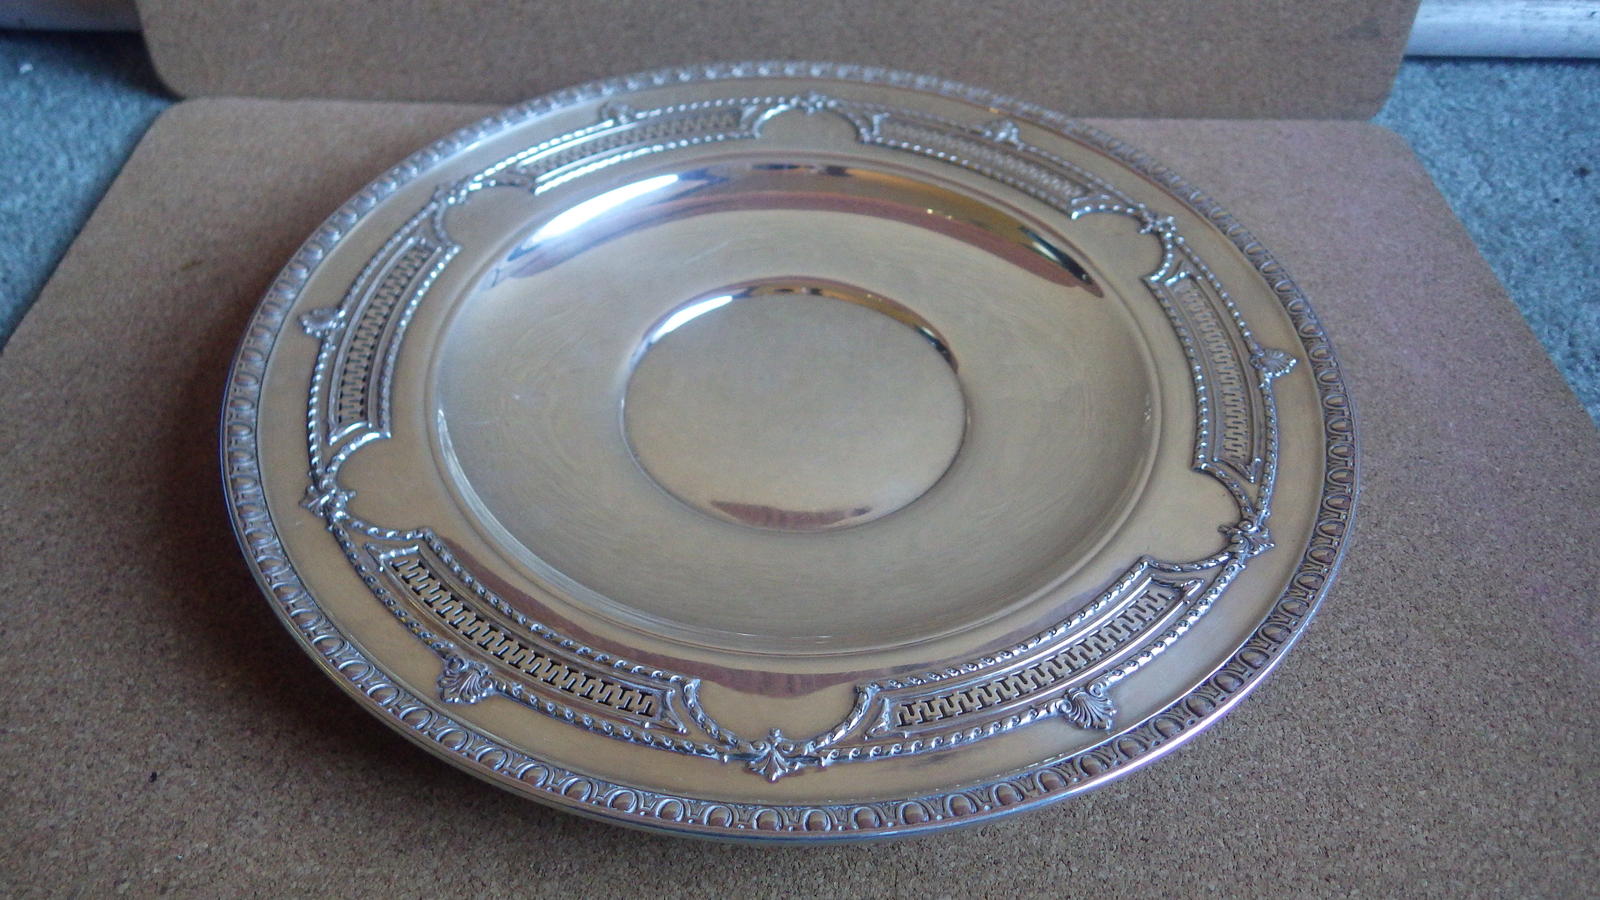 VINTAGE WALLACE 10 INCH STERLING SILVER PIERCED REPOUSSE TRAY 3490-3 279 GRAMS - $375.00